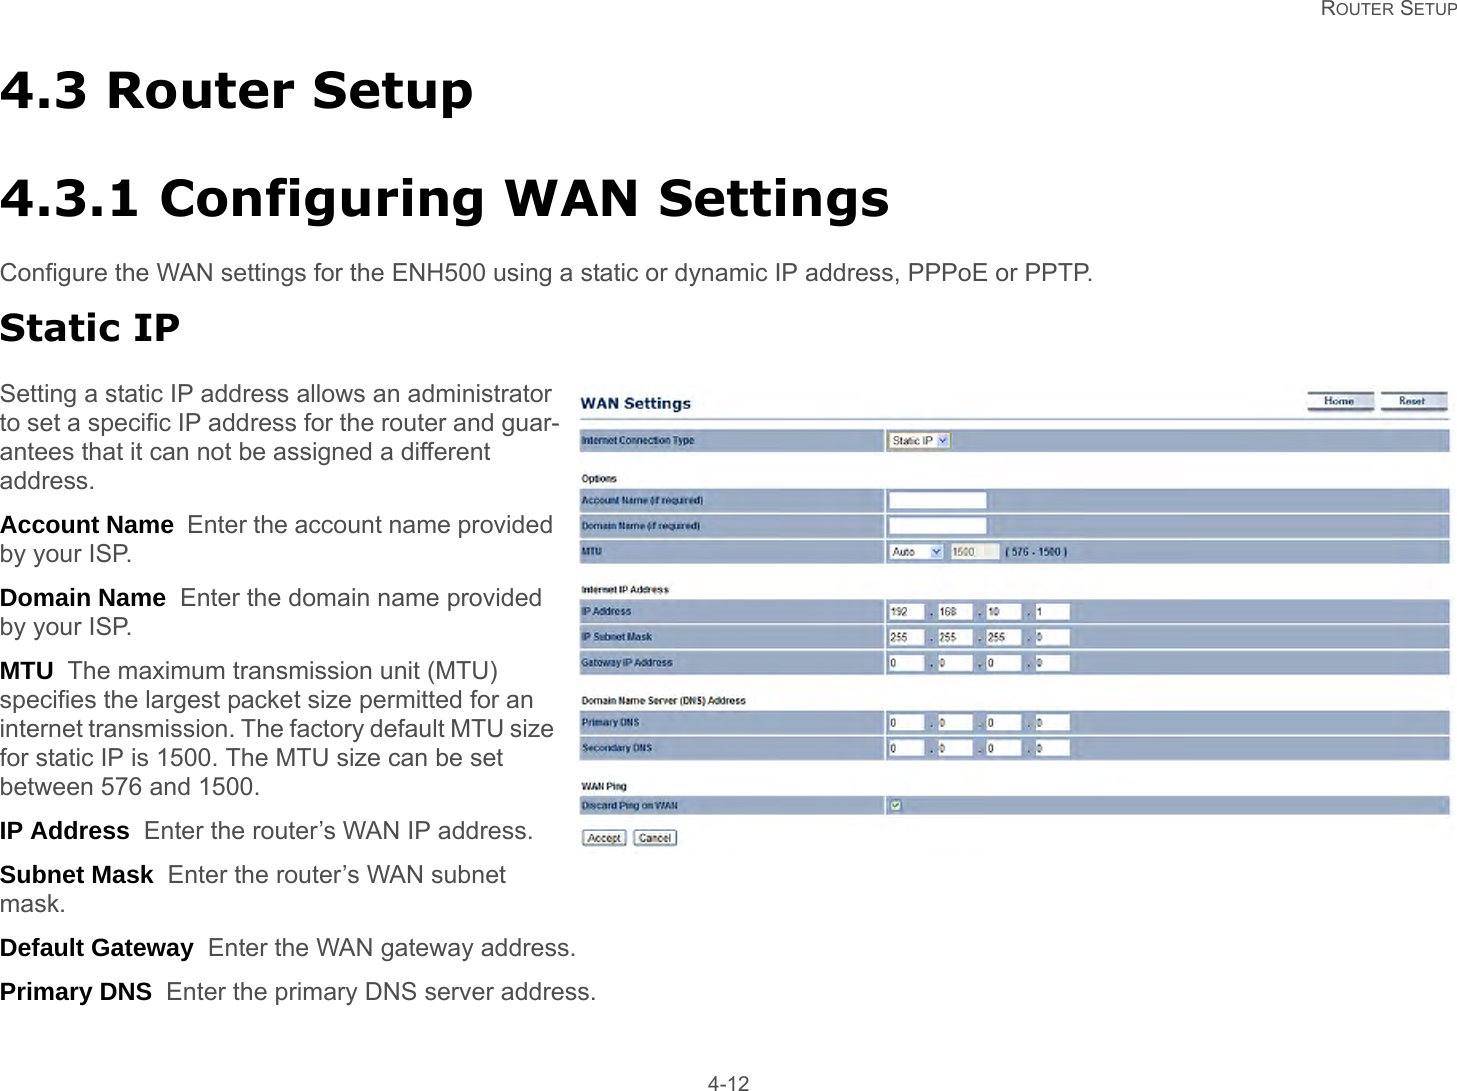   ROUTER SETUP 4-124.3 Router Setup4.3.1 Configuring WAN SettingsConfigure the WAN settings for the ENH500 using a static or dynamic IP address, PPPoE or PPTP.Static IPSetting a static IP address allows an administrator to set a specific IP address for the router and guar-antees that it can not be assigned a different address.Account Name  Enter the account name provided by your ISP.Domain Name  Enter the domain name provided by your ISP.MTU  The maximum transmission unit (MTU) specifies the largest packet size permitted for an internet transmission. The factory default MTU size for static IP is 1500. The MTU size can be set between 576 and 1500.IP Address  Enter the router’s WAN IP address.Subnet Mask  Enter the router’s WAN subnet mask.Default Gateway  Enter the WAN gateway address.Primary DNS  Enter the primary DNS server address.